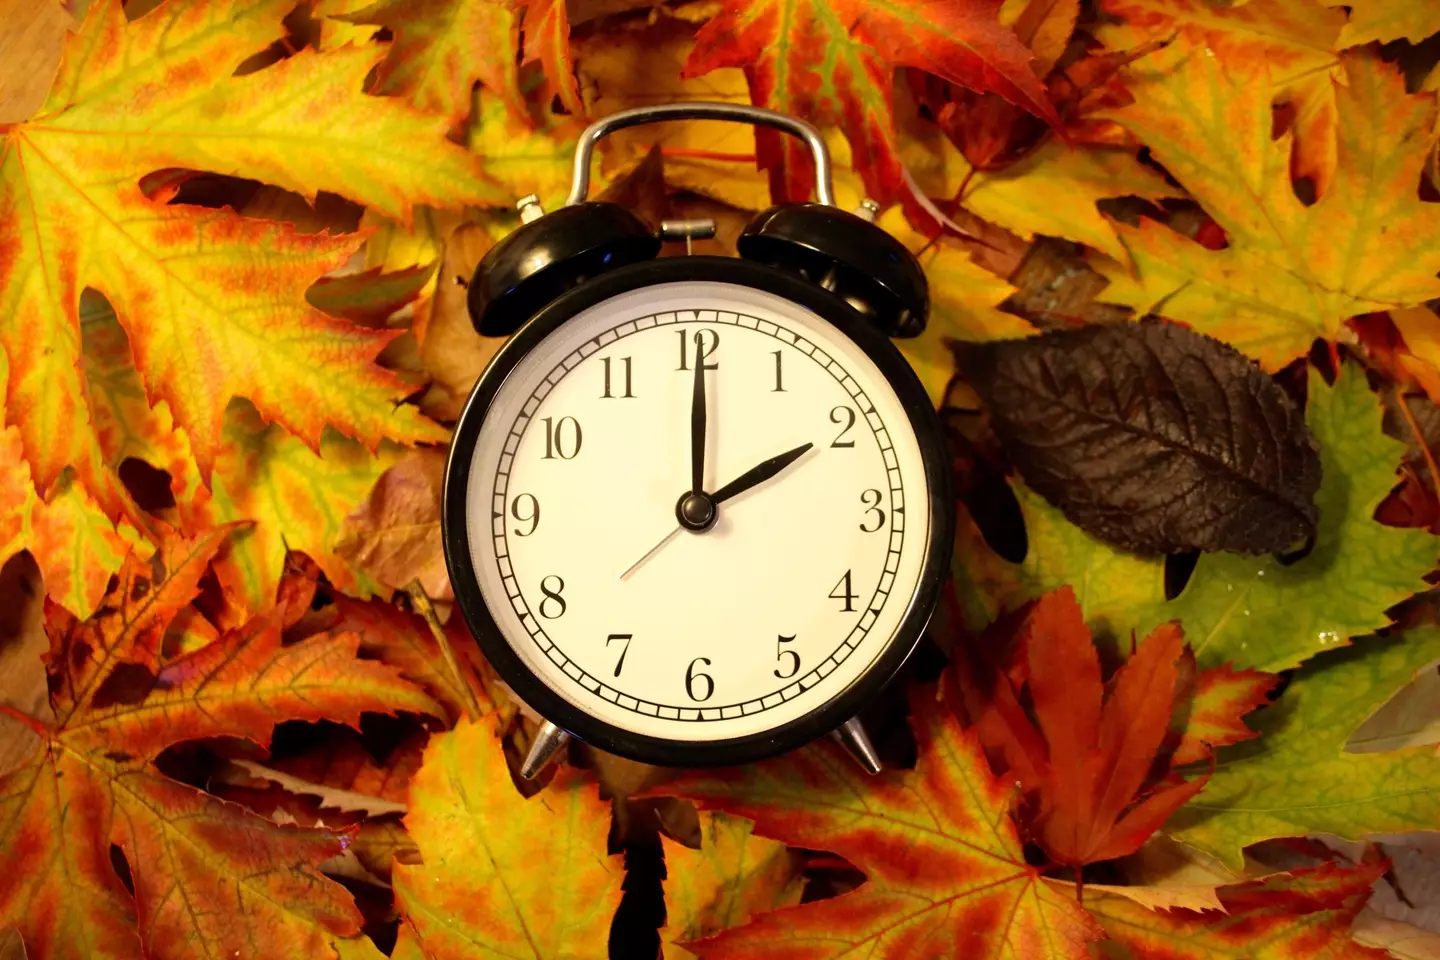 The clocks go back at the end of October each year.